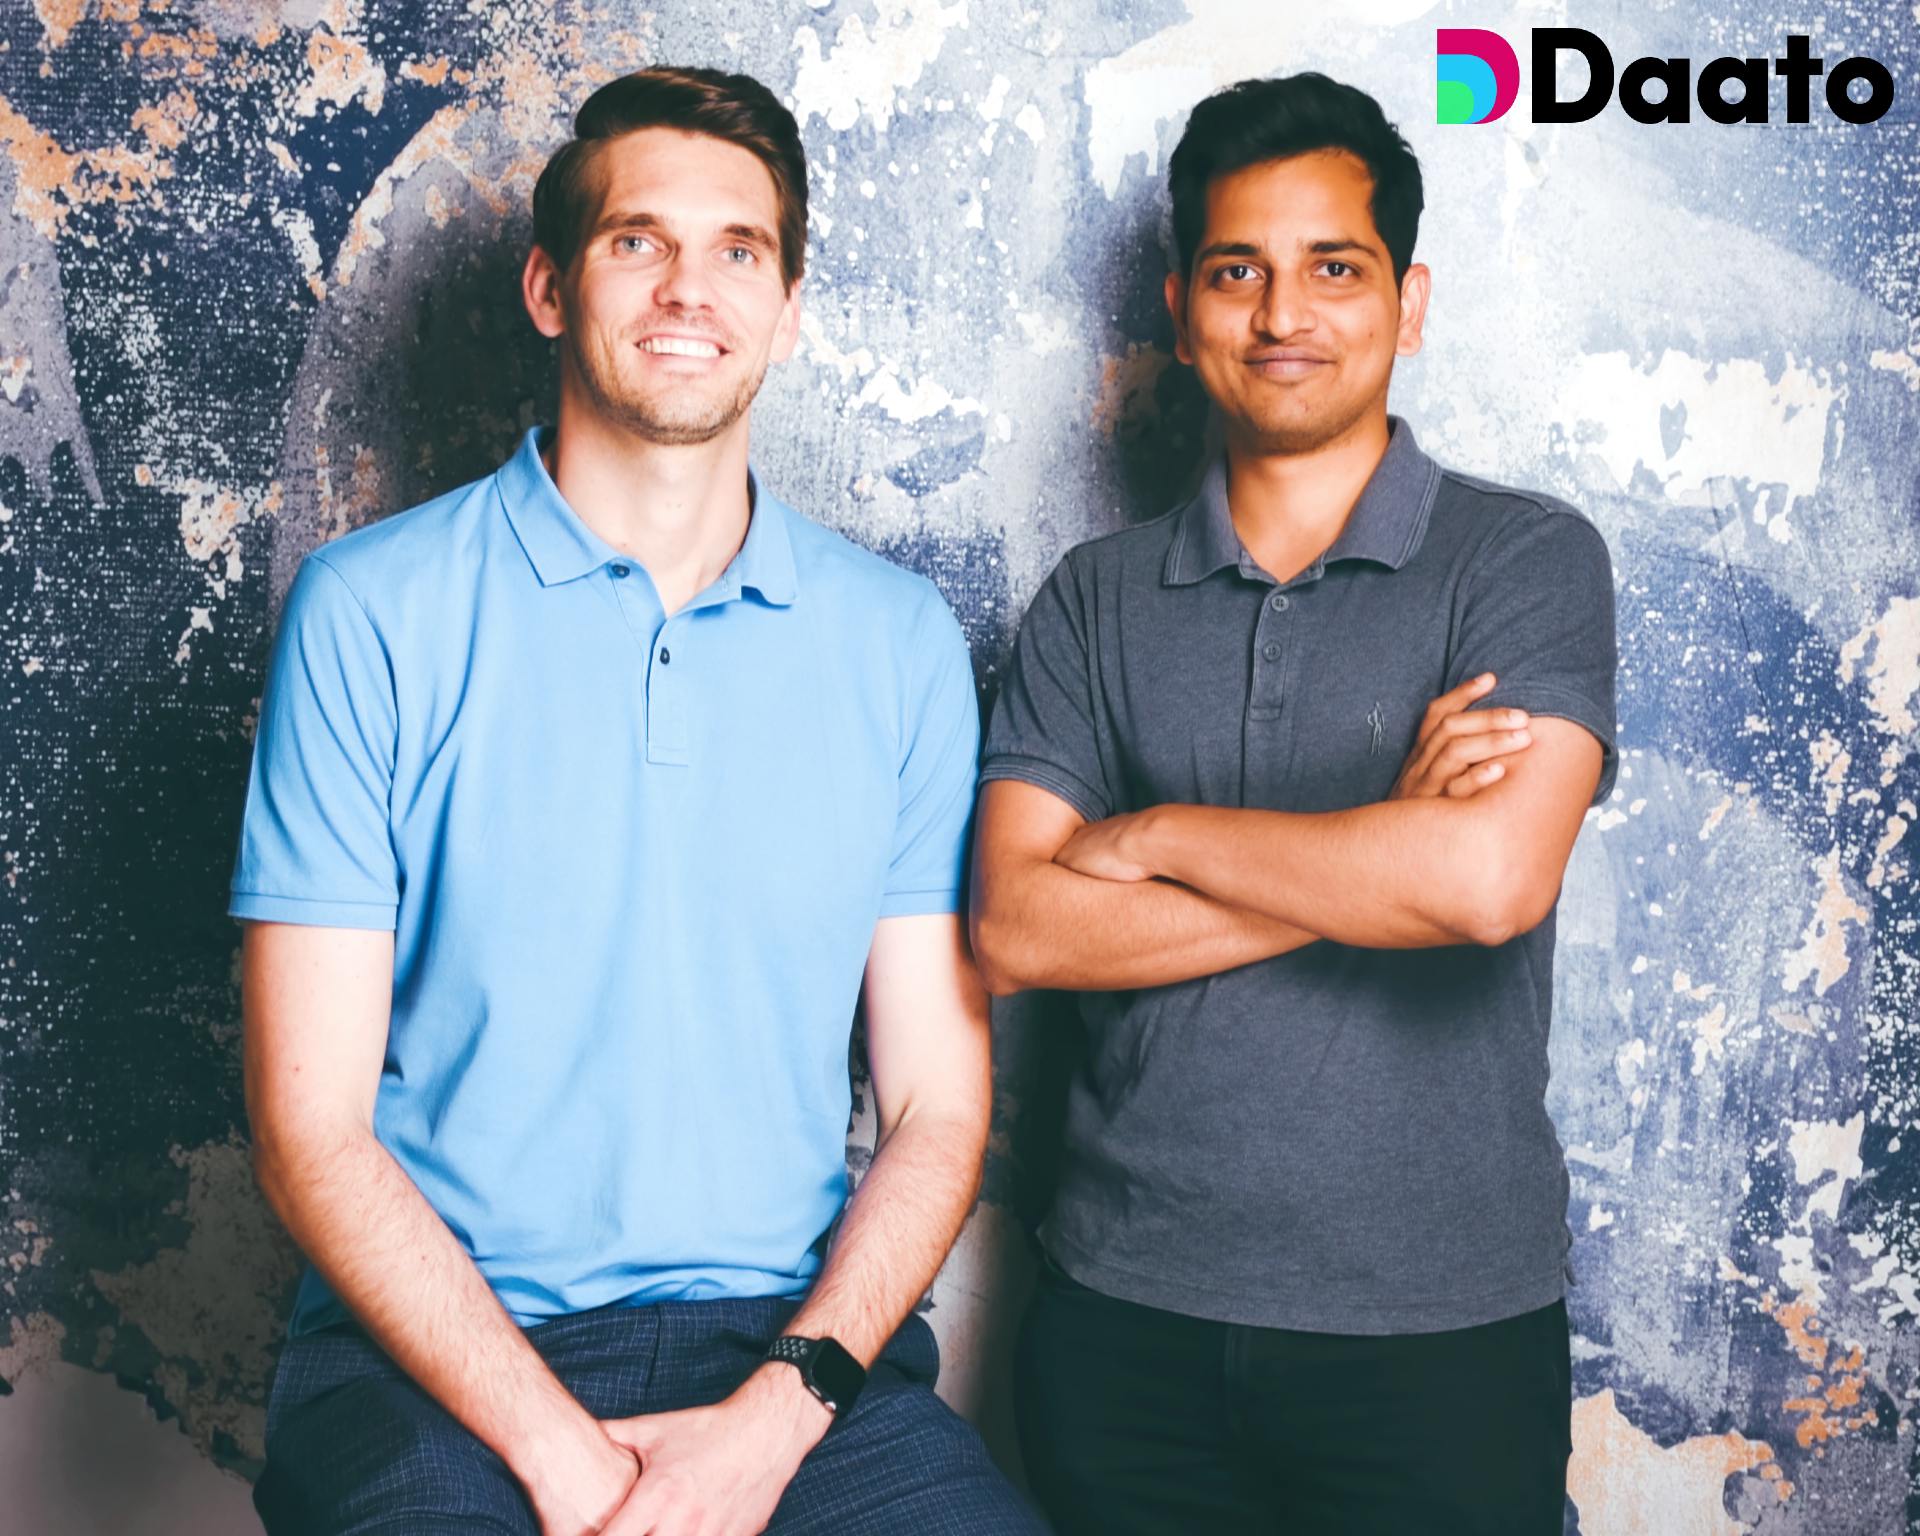 Daato secures €5 Million in seed round funding to accelerate ESG transformation